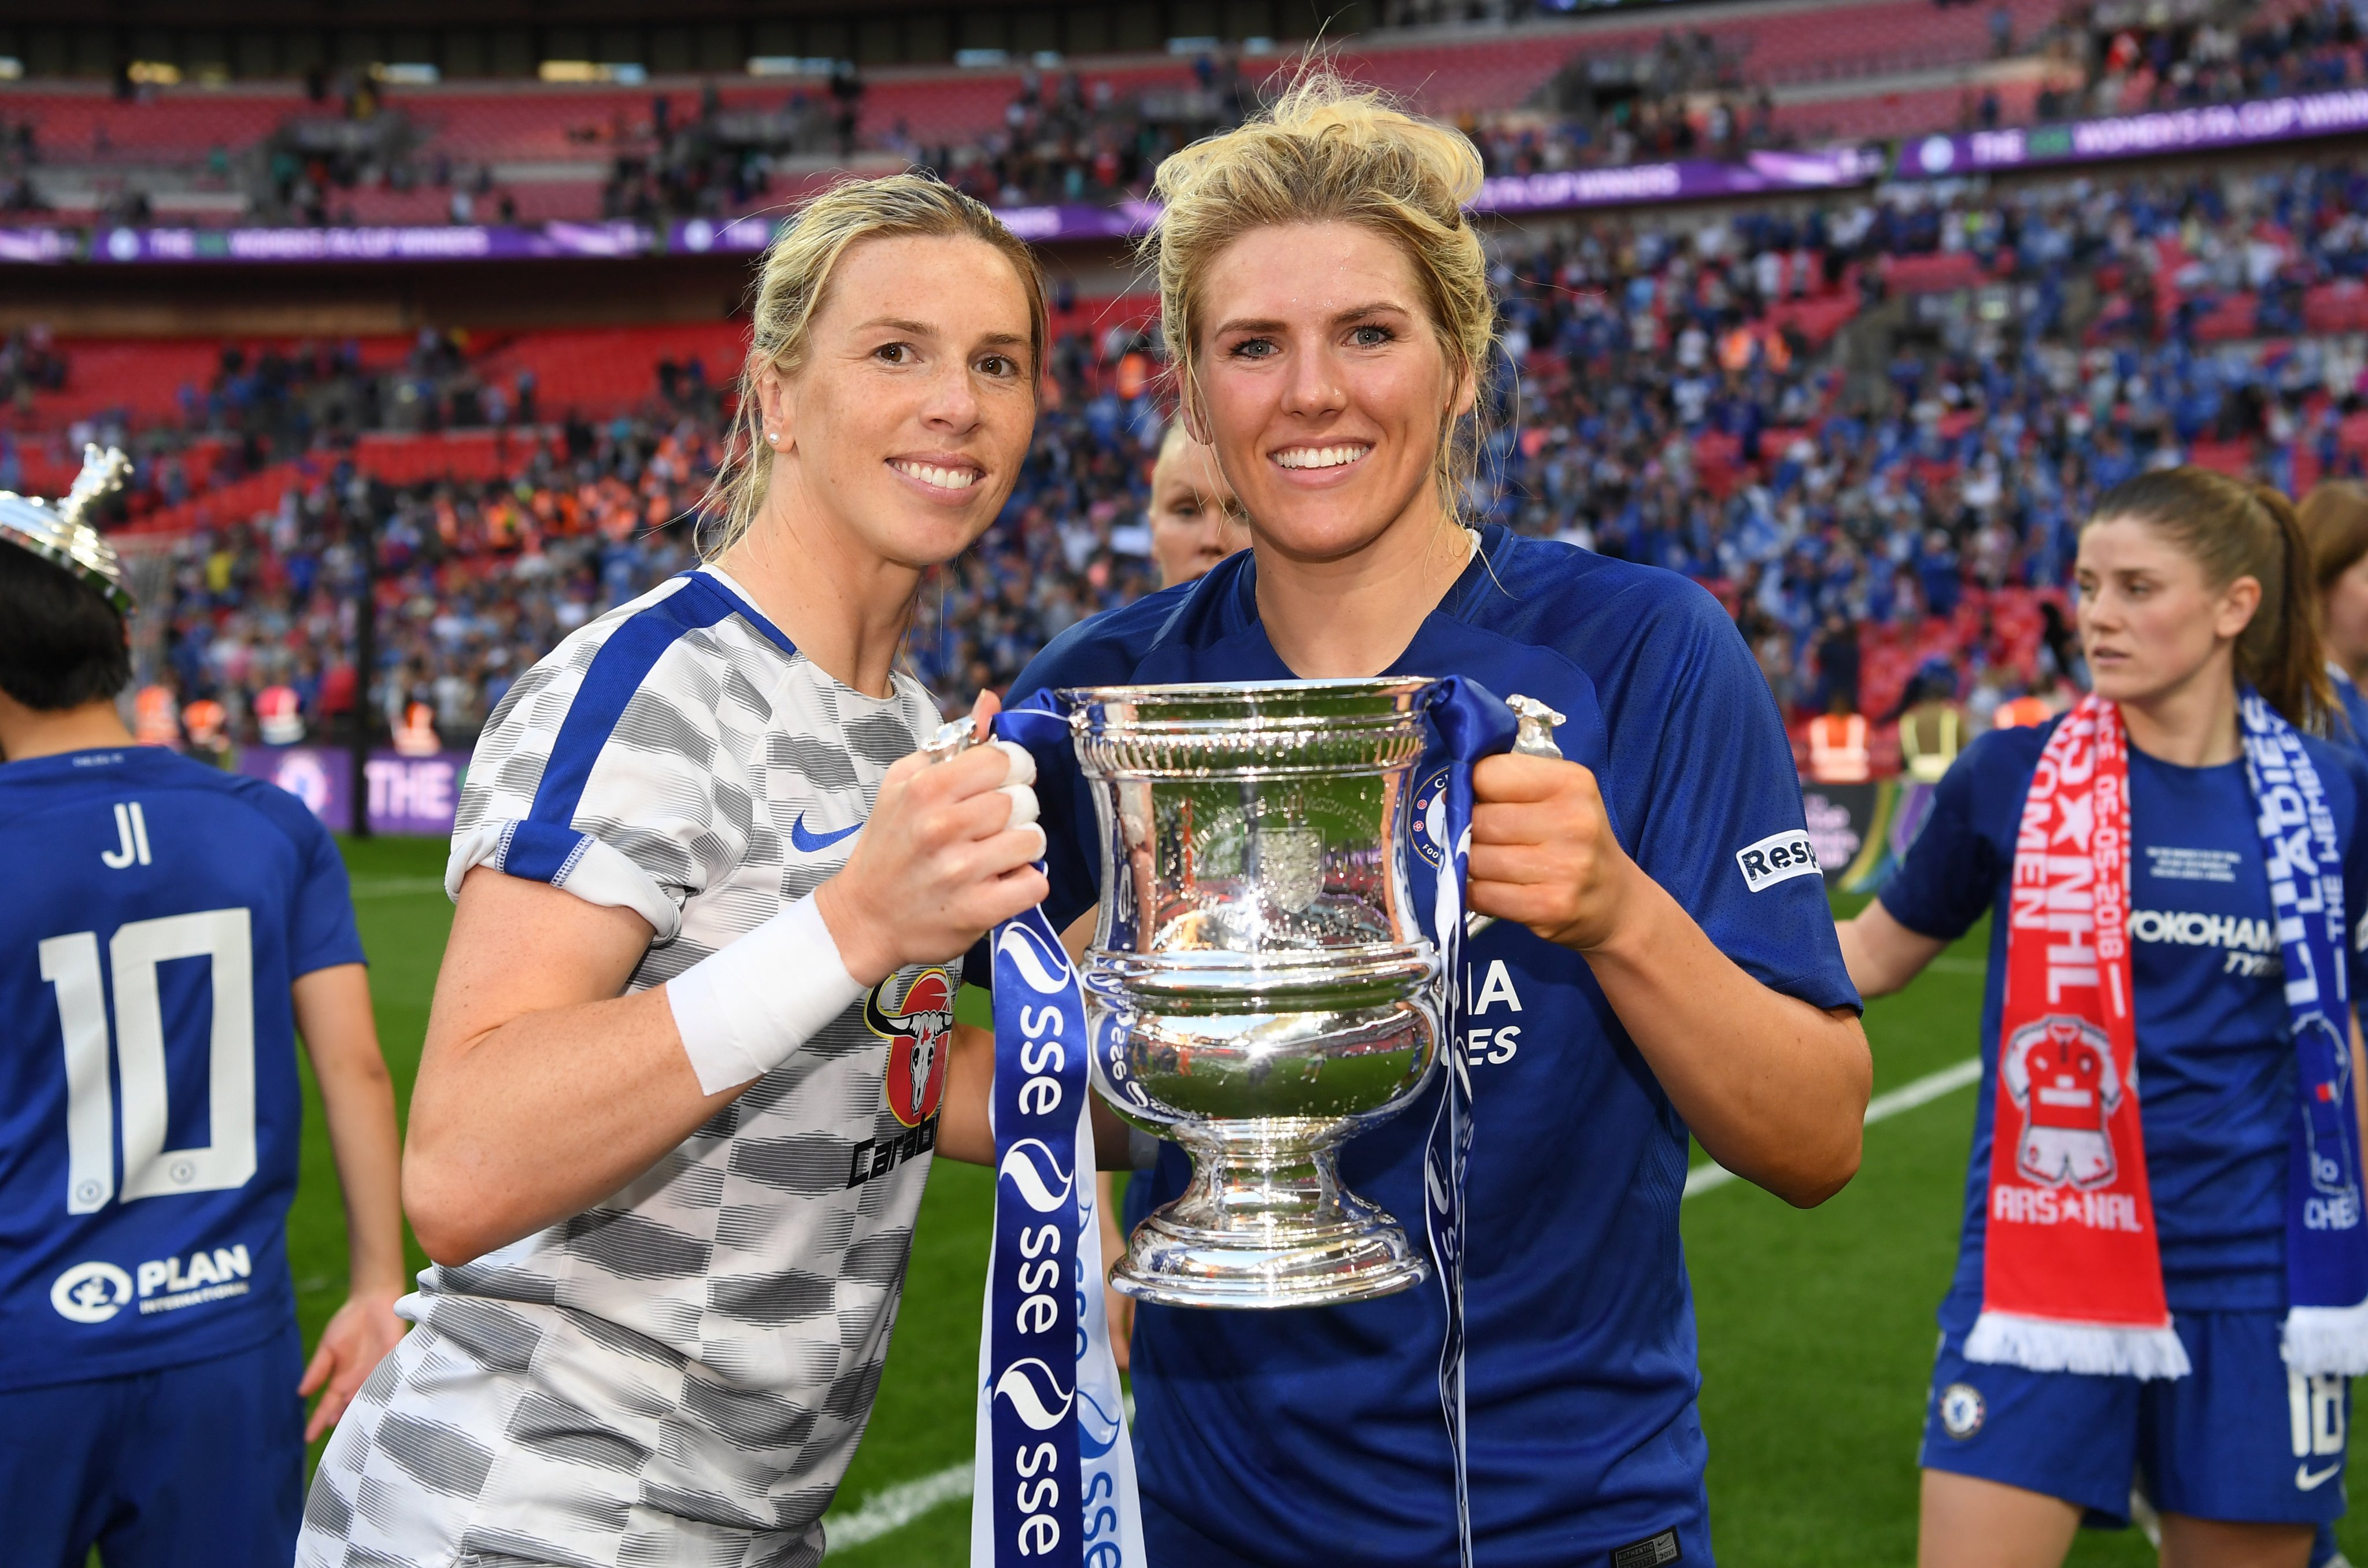 Photo Credit: Twitter @ChelseaFCW